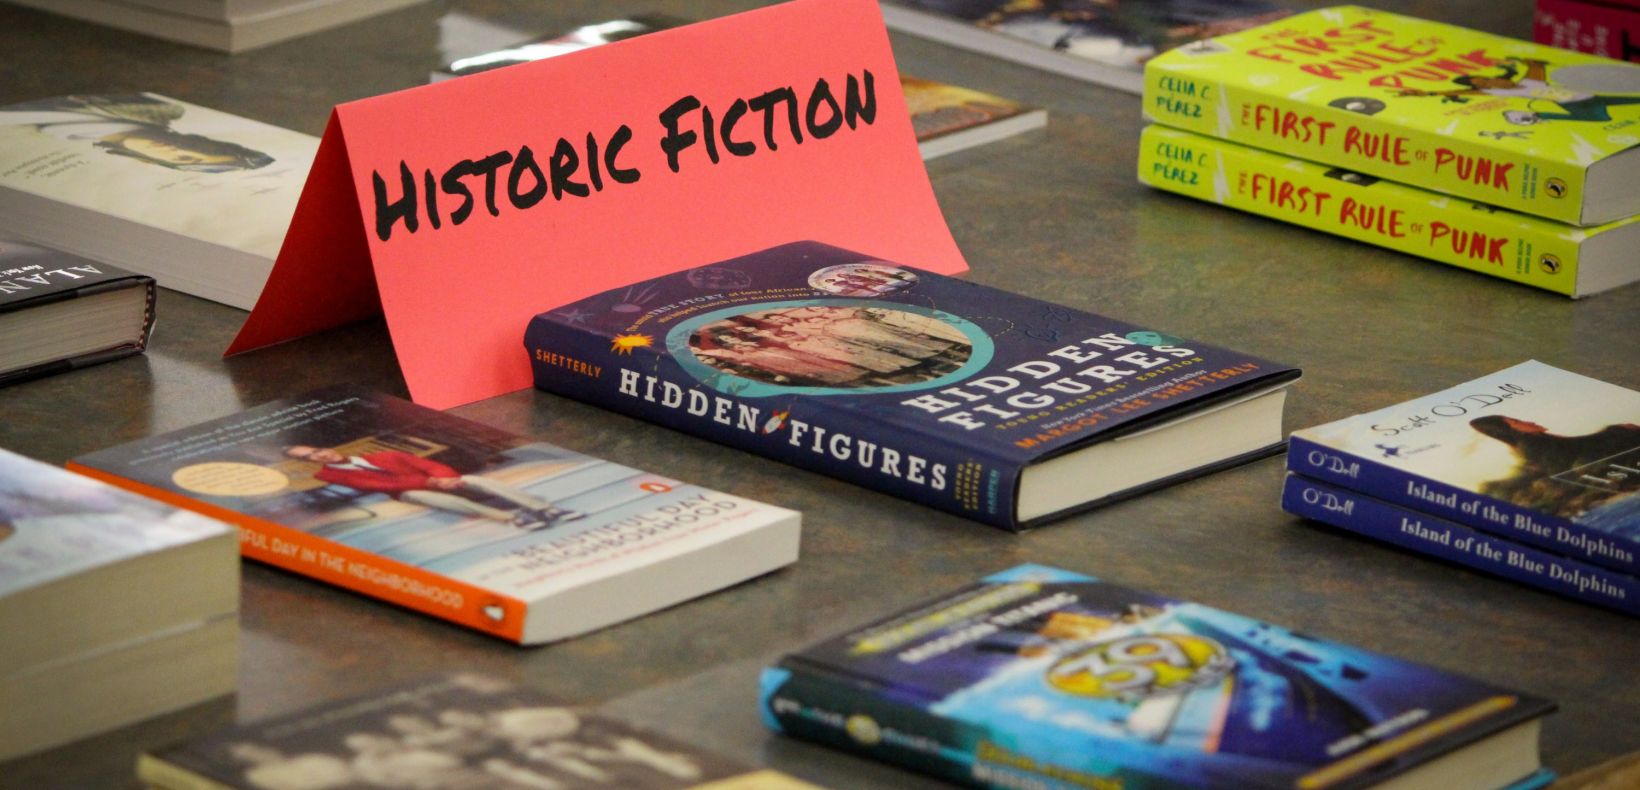 display of books spread on a table